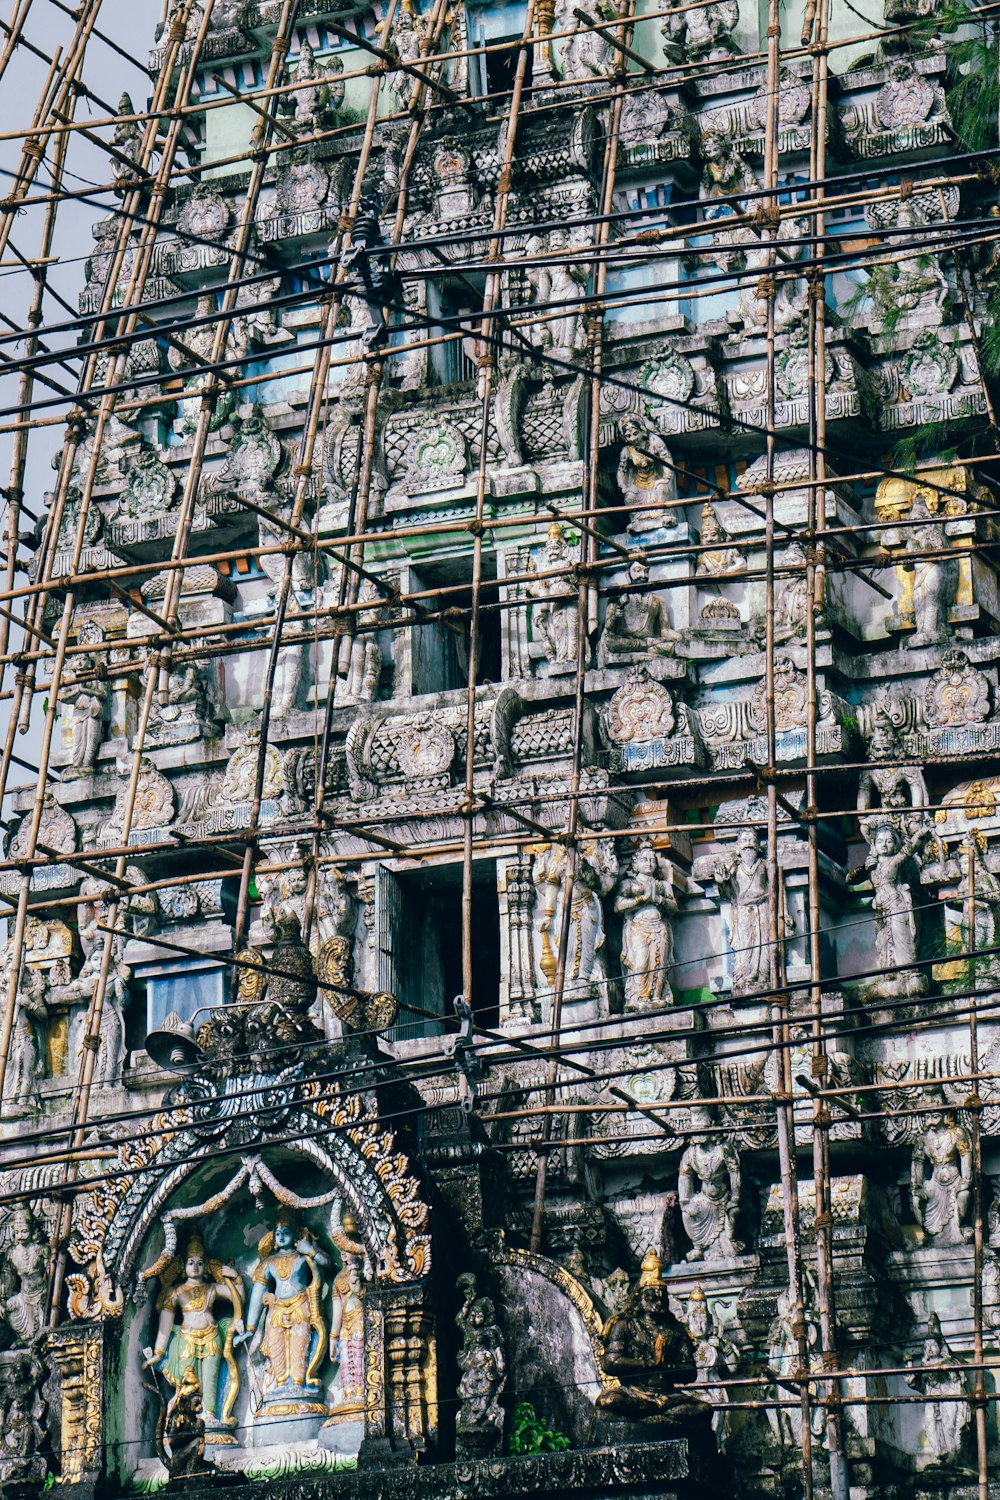 scaffolding surrounding a building with statues on it